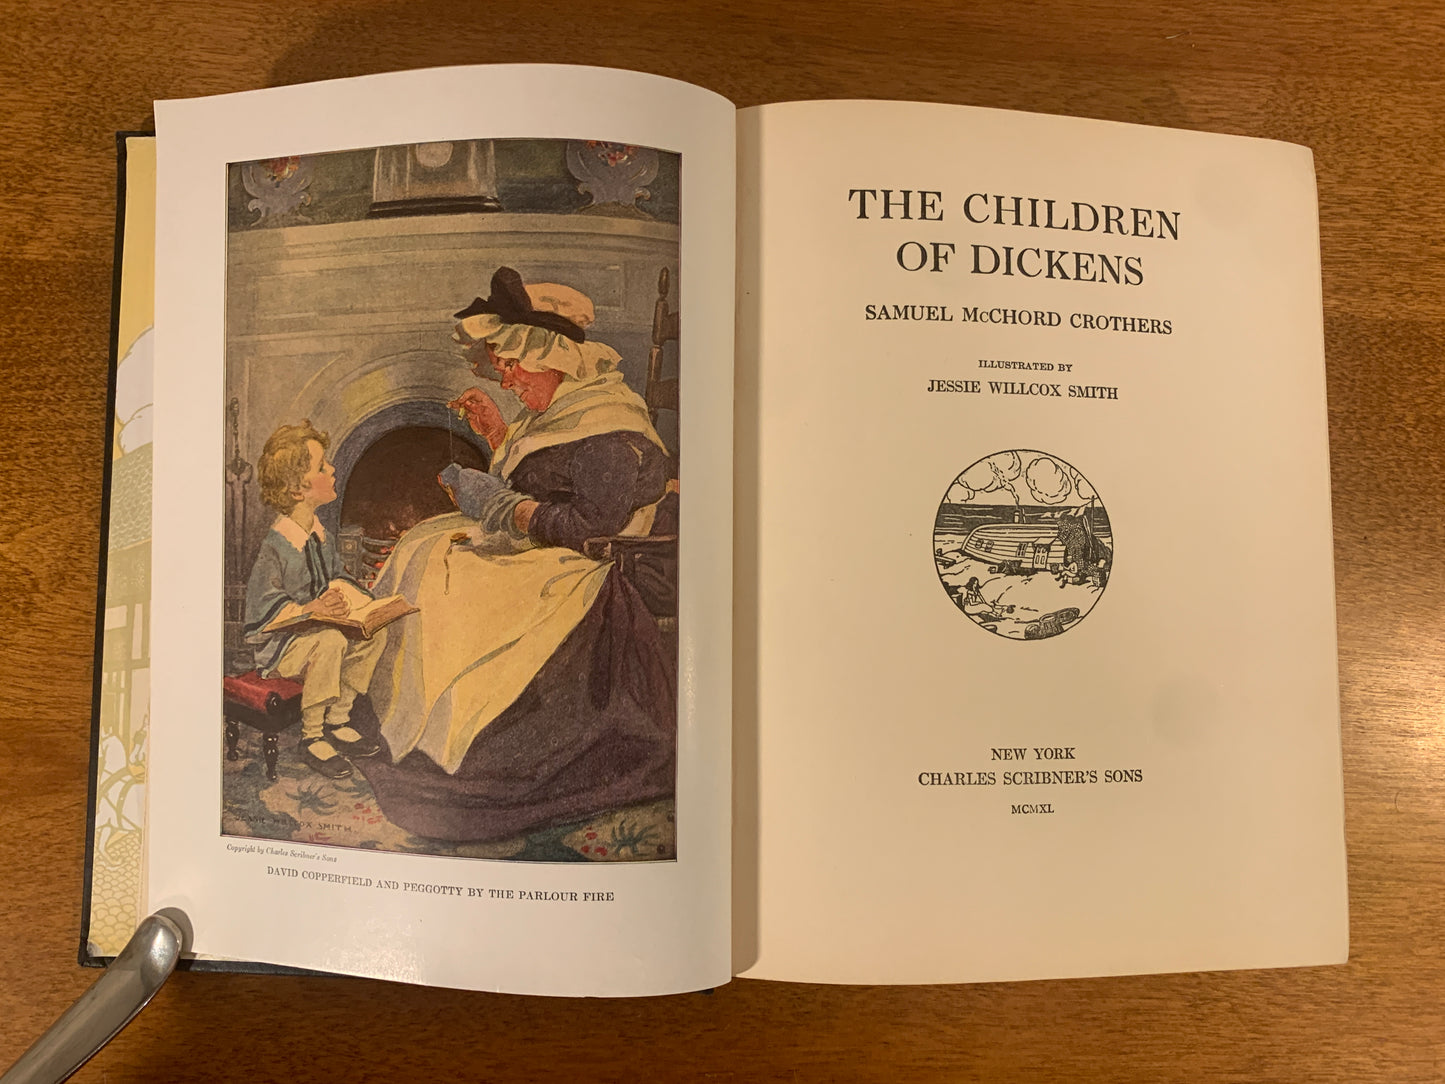 The Children of Dickens by Samuel McChord Crothers 1950